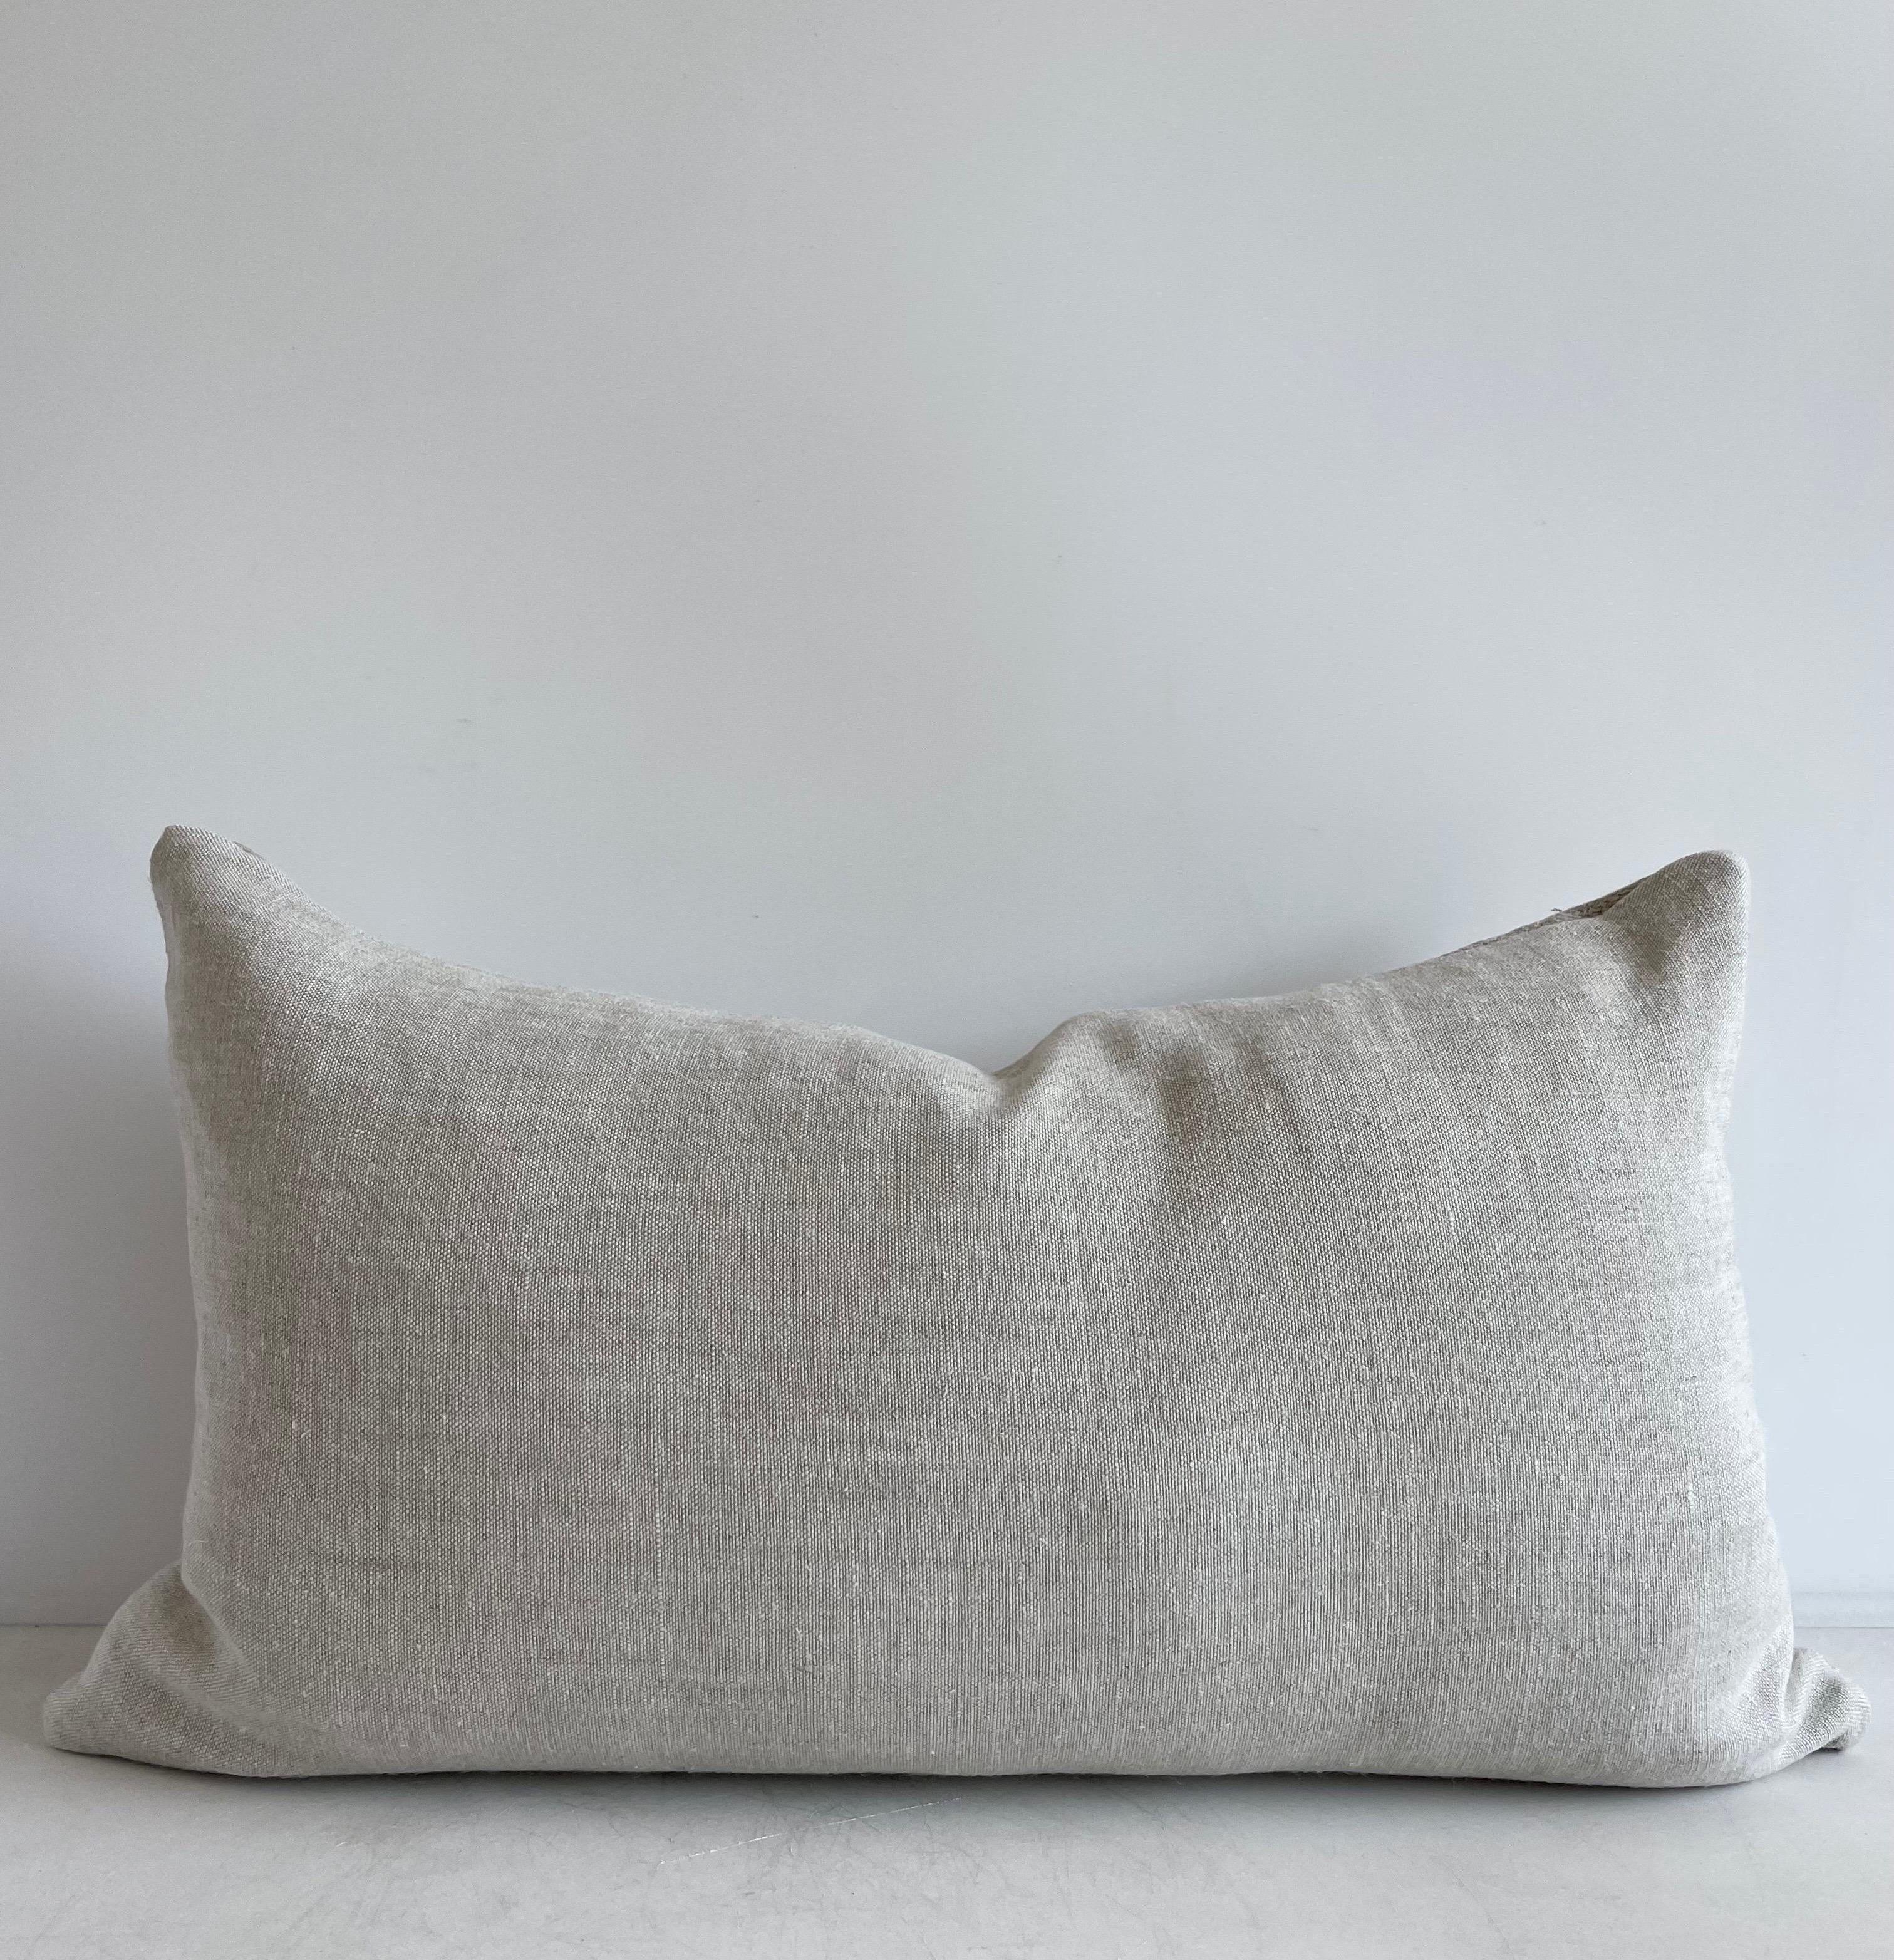 Vintage German GrainSack Pillow
Size: 15” x 25” 
Qty 2 
ANTIQUE GRAIN SACK PILLOW Lovely grain feed sack pillows from Europe. We custom-made these out of the original antique feed sacks, with brass zipper closure and overlocked edges. Condition: